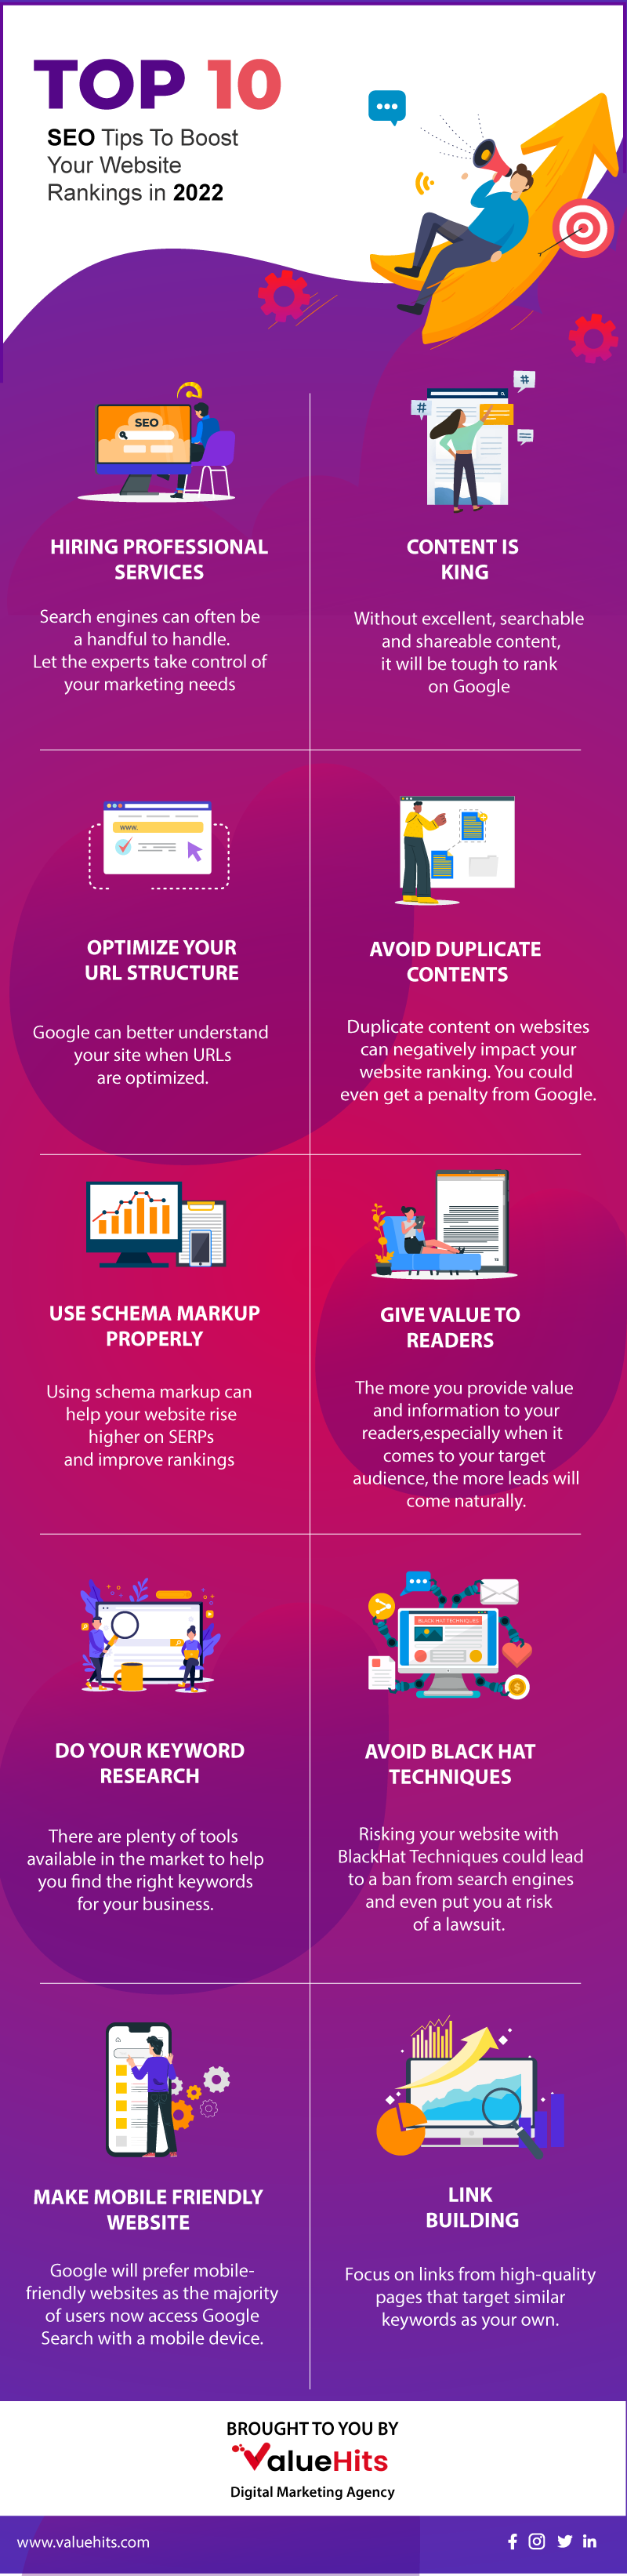 Top 10 SEO Tips to Boost Your Website Ranking in 2022 (Infographic)